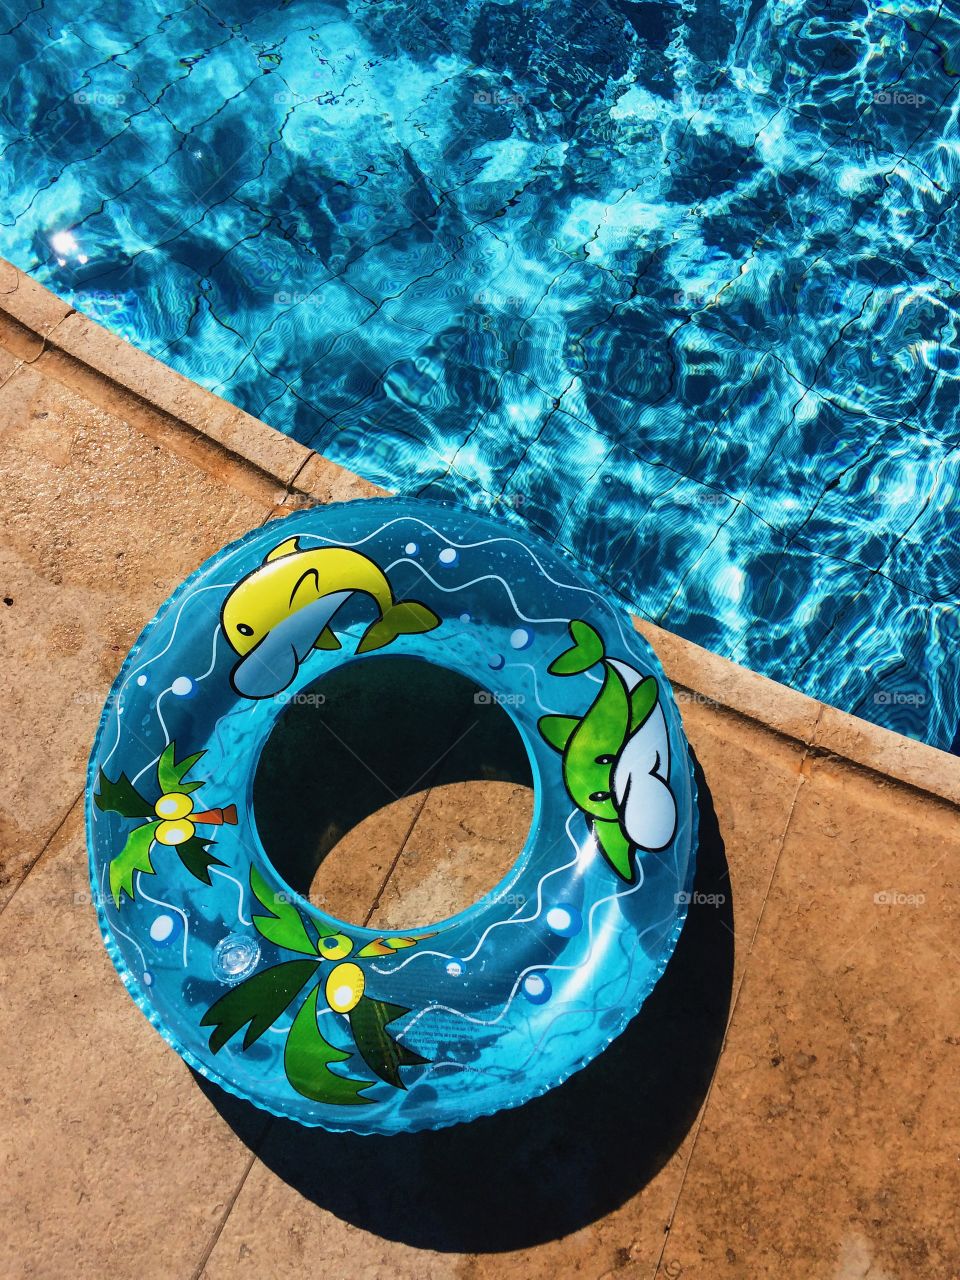 Blue inflatable ring near swimming pool